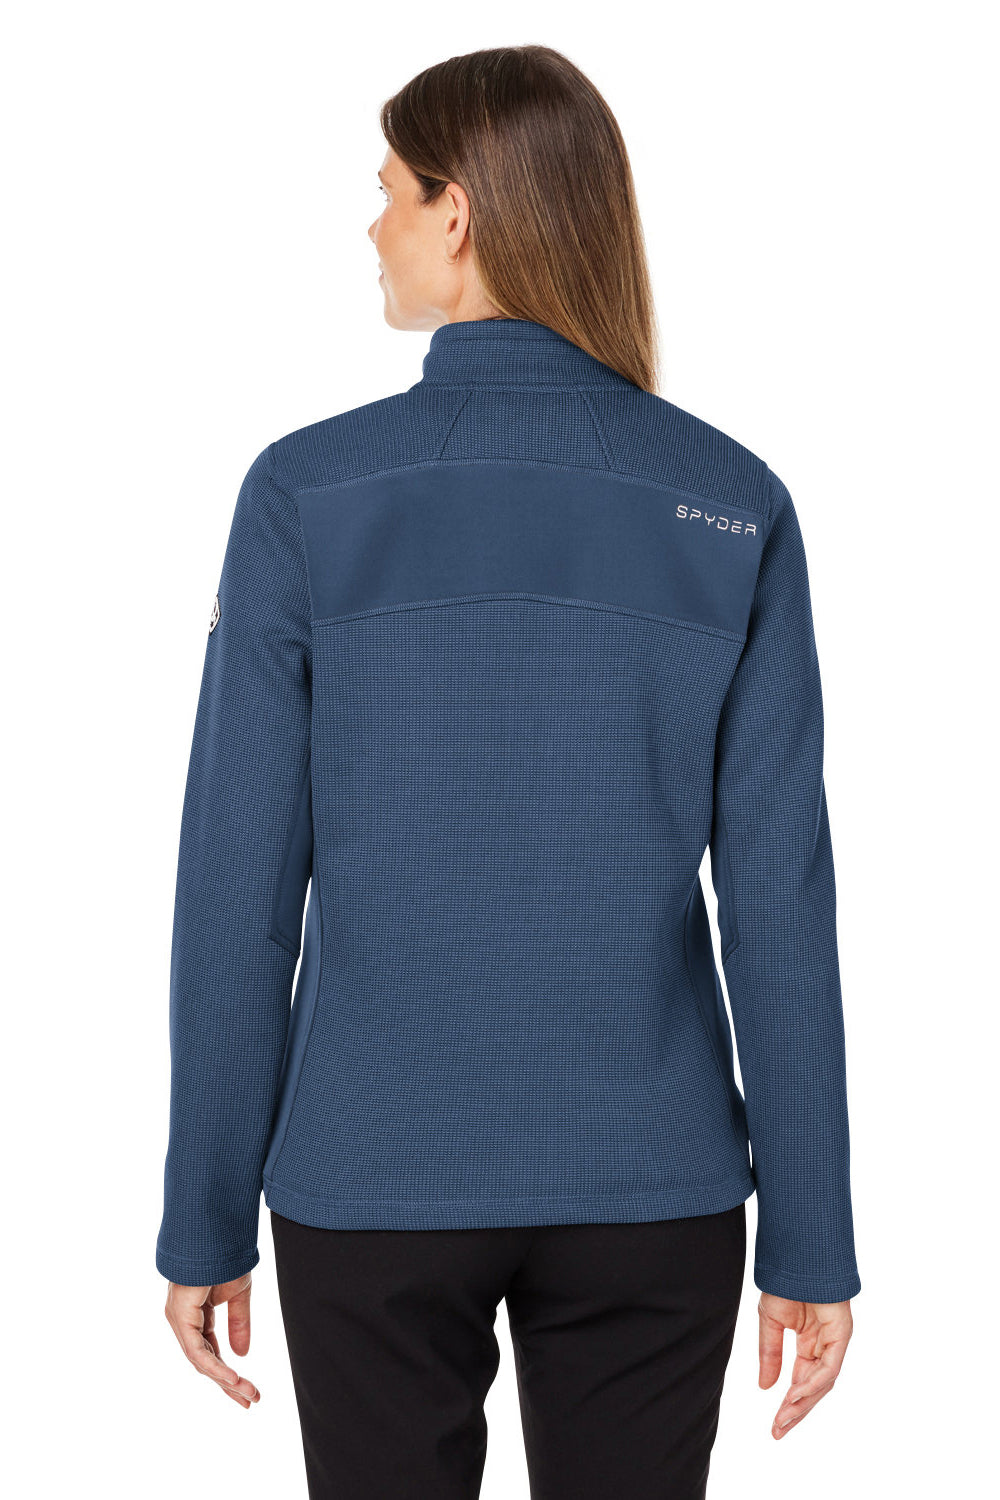 Spyder S17937 Womens Constant Canyon Full Zip Sweater Jacket Frontier Blue Back